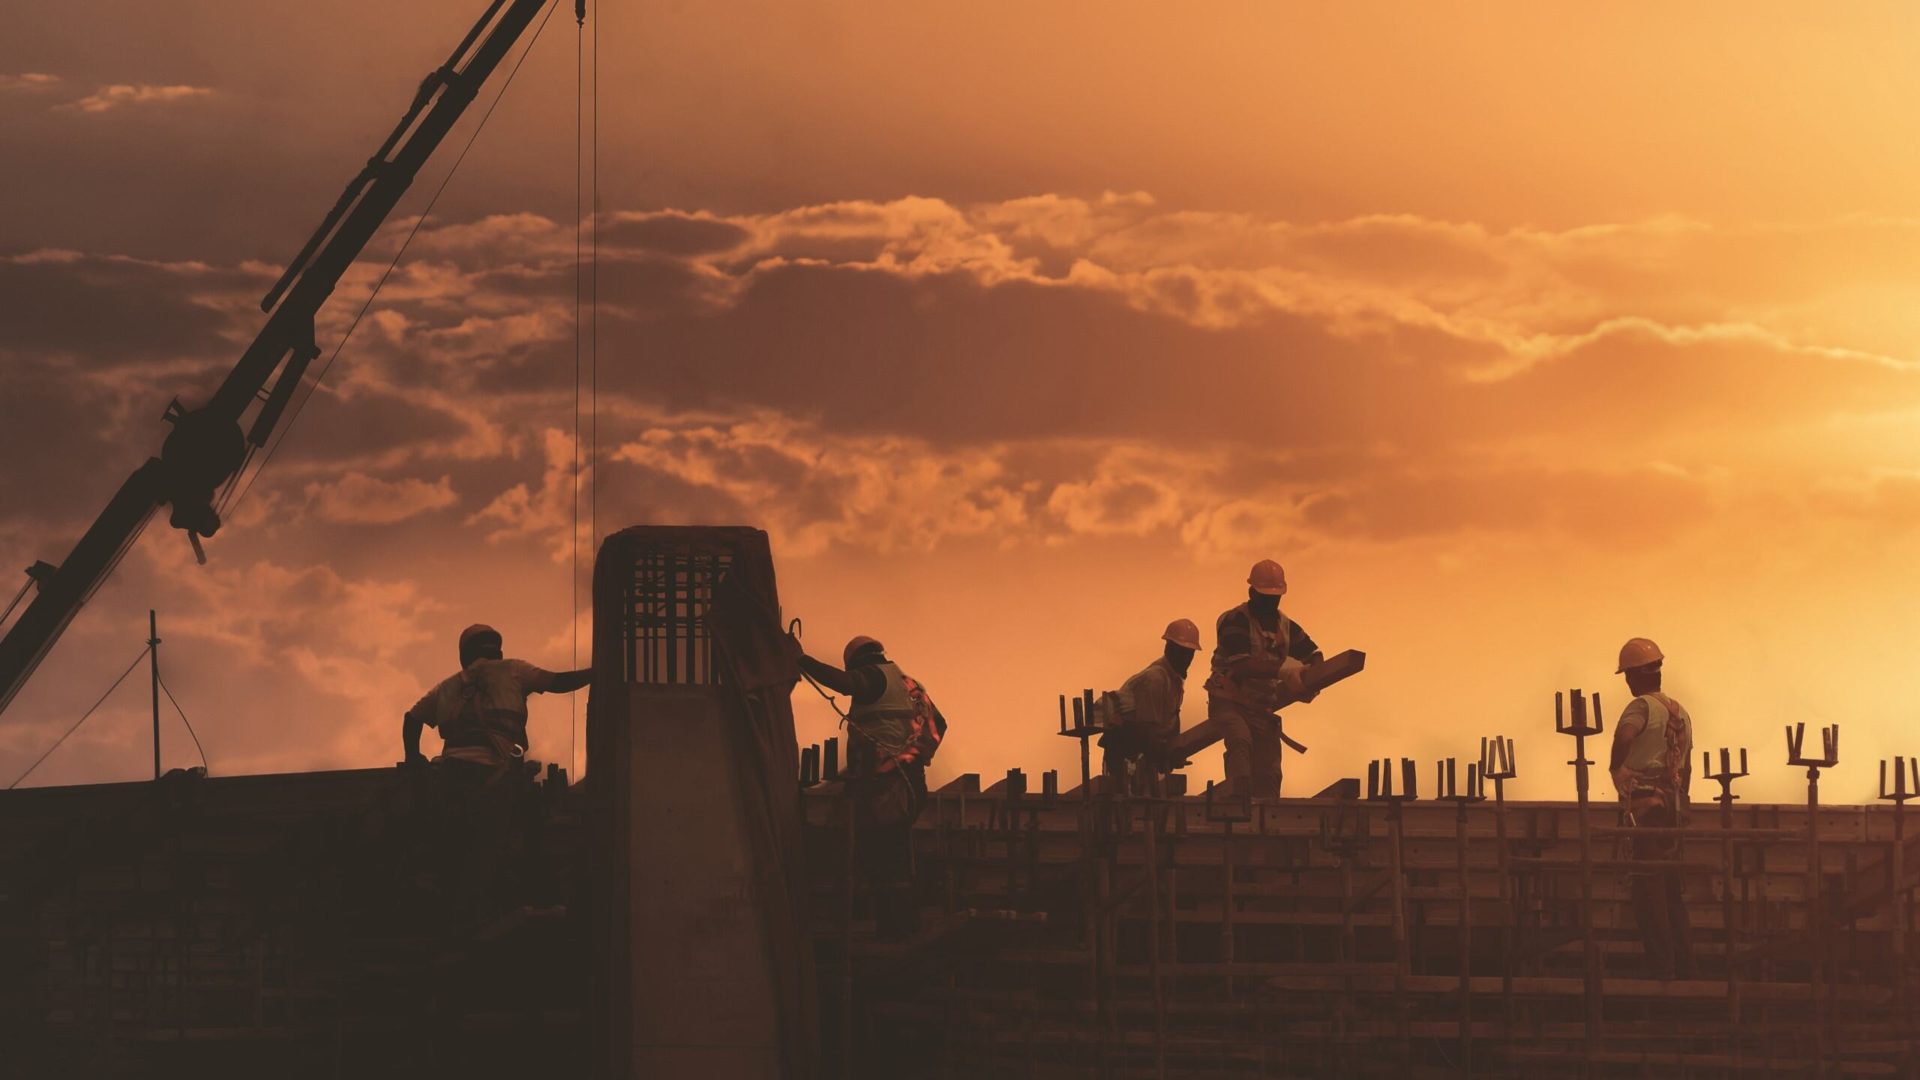 Construction workers in silhouette against orange sunset